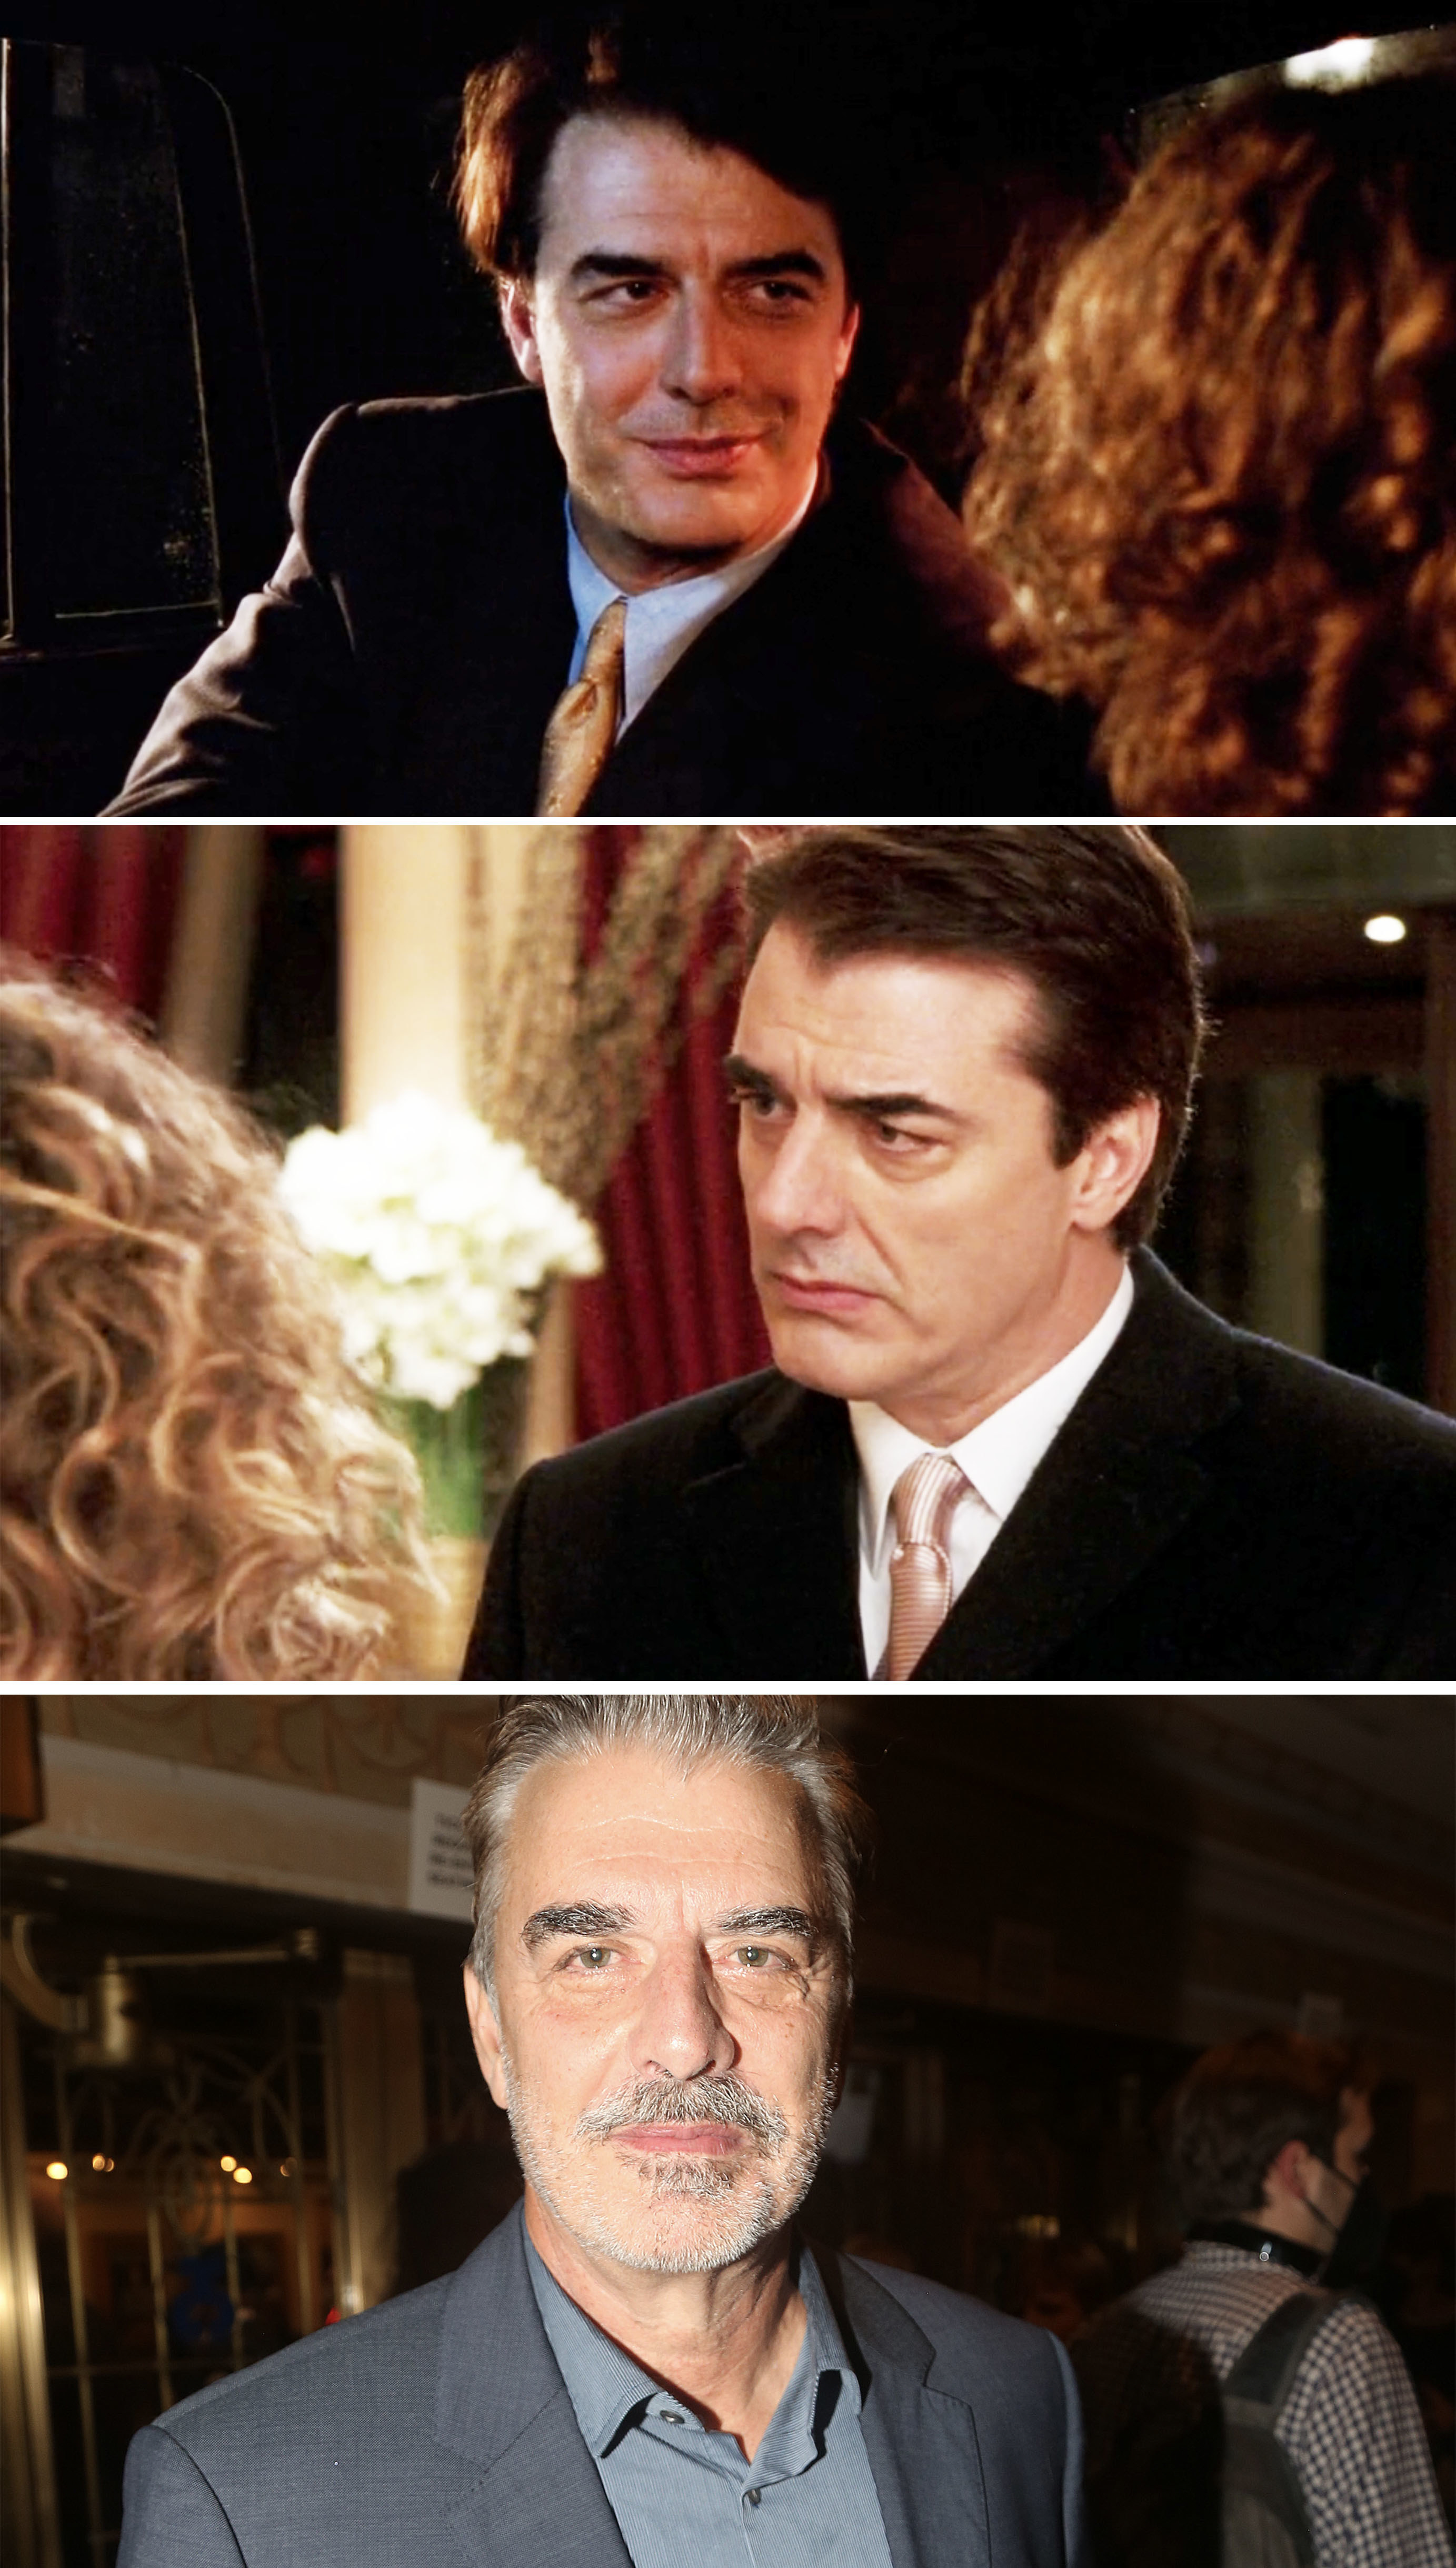 mr. big during 3 different seasons